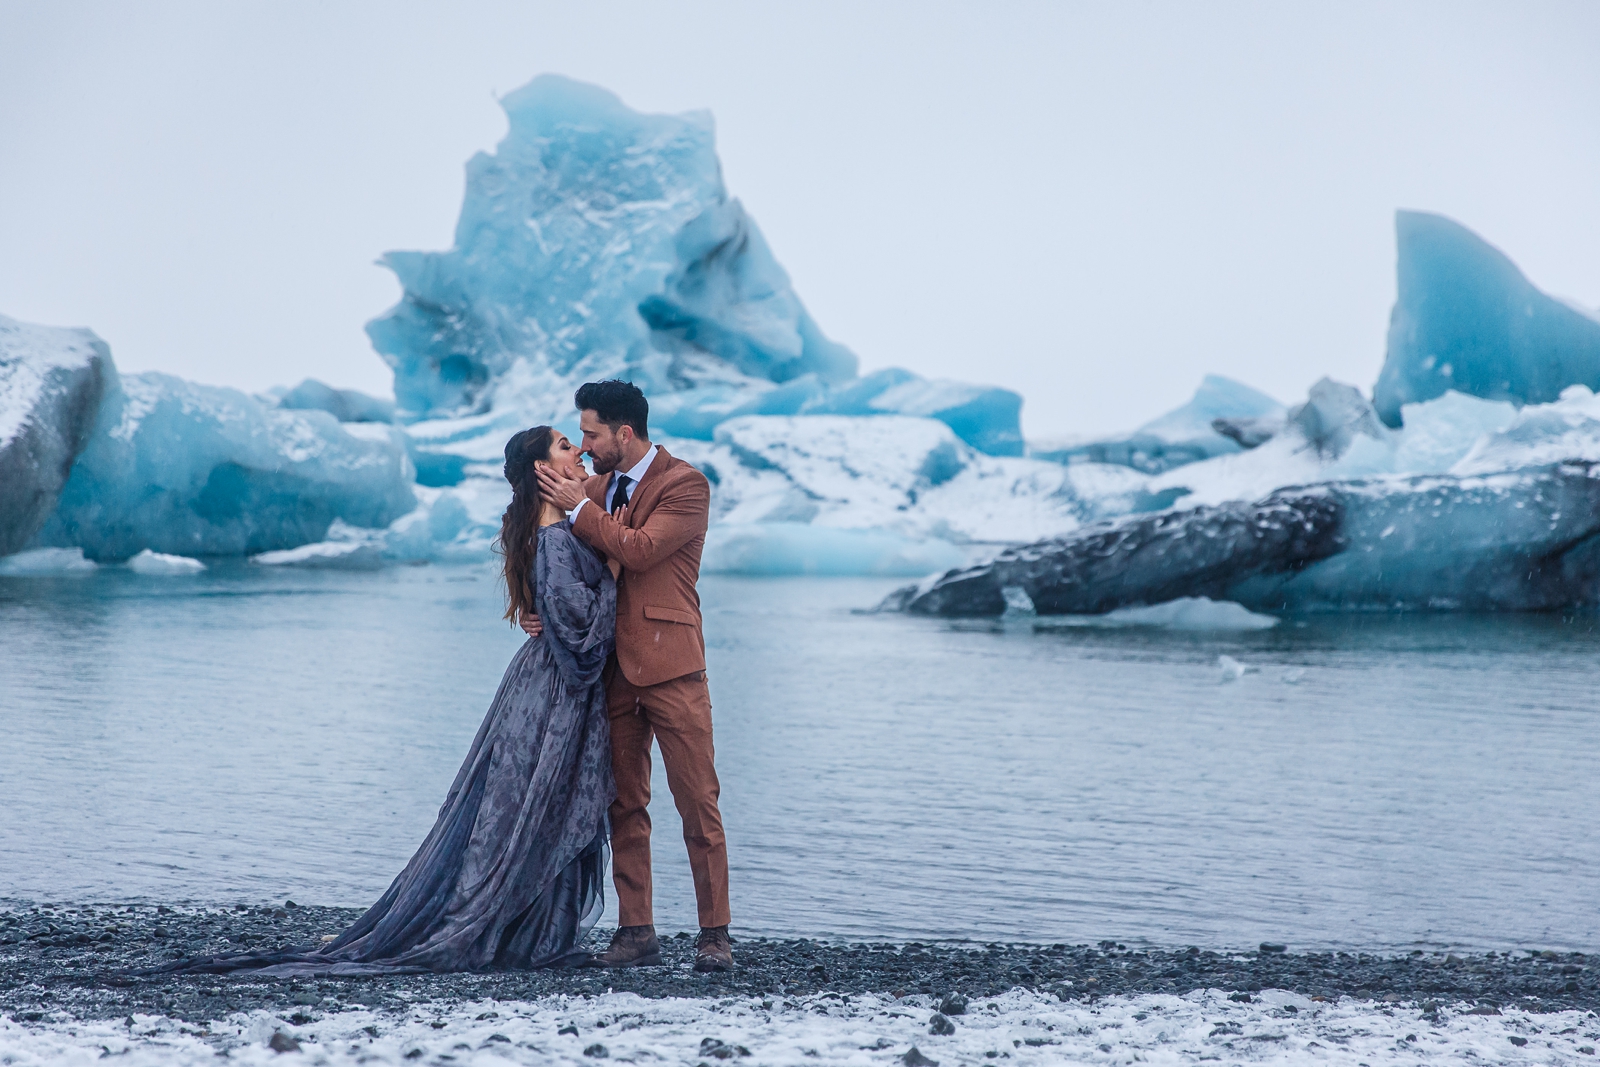 This eloping couple wore nontraditional clothes at their Jökulsárlón Iceland elopement.